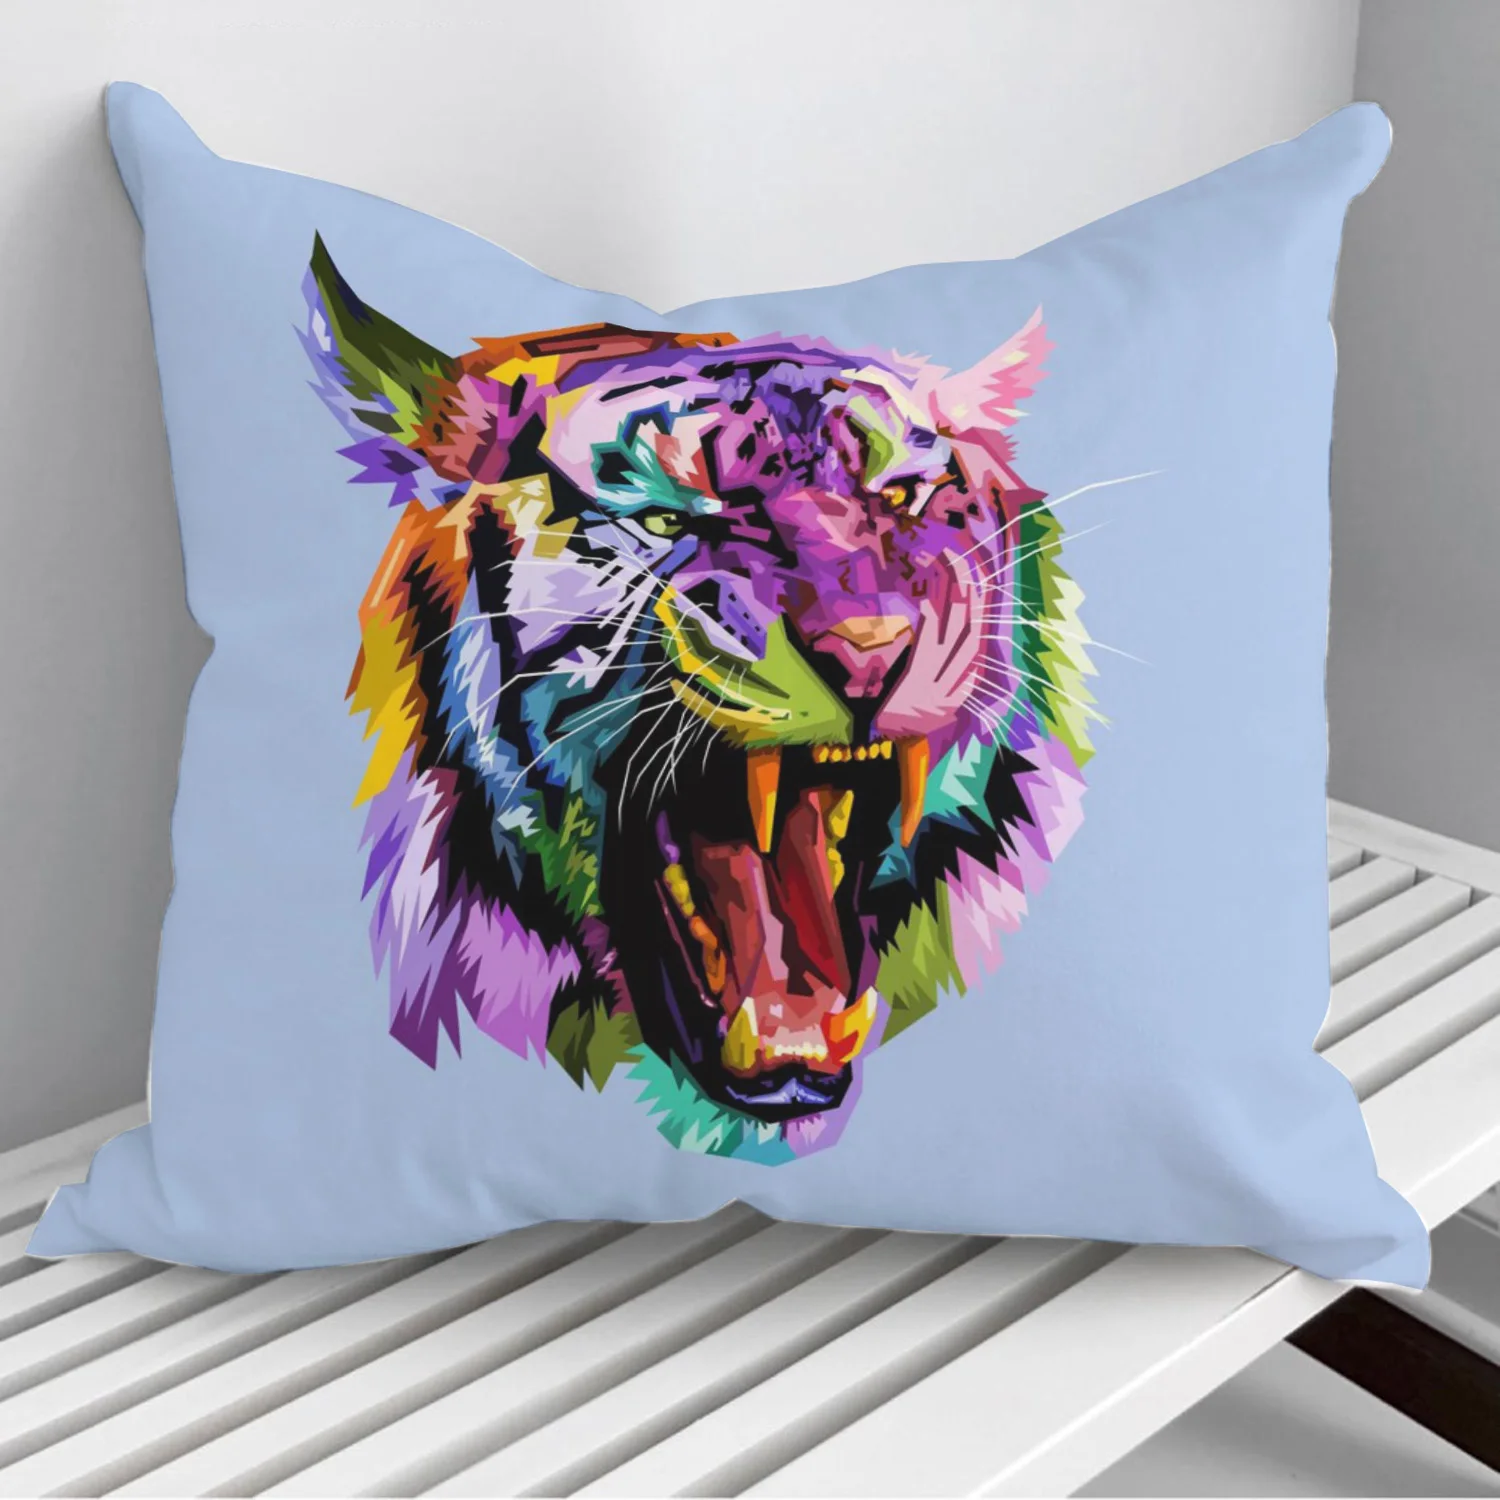 

angry tiger on pop art Throw Pillows Cushion Cover On Sofa Home Decor 45*45cm 40*40cm Gift Pillowcase Cojines Dropshipping